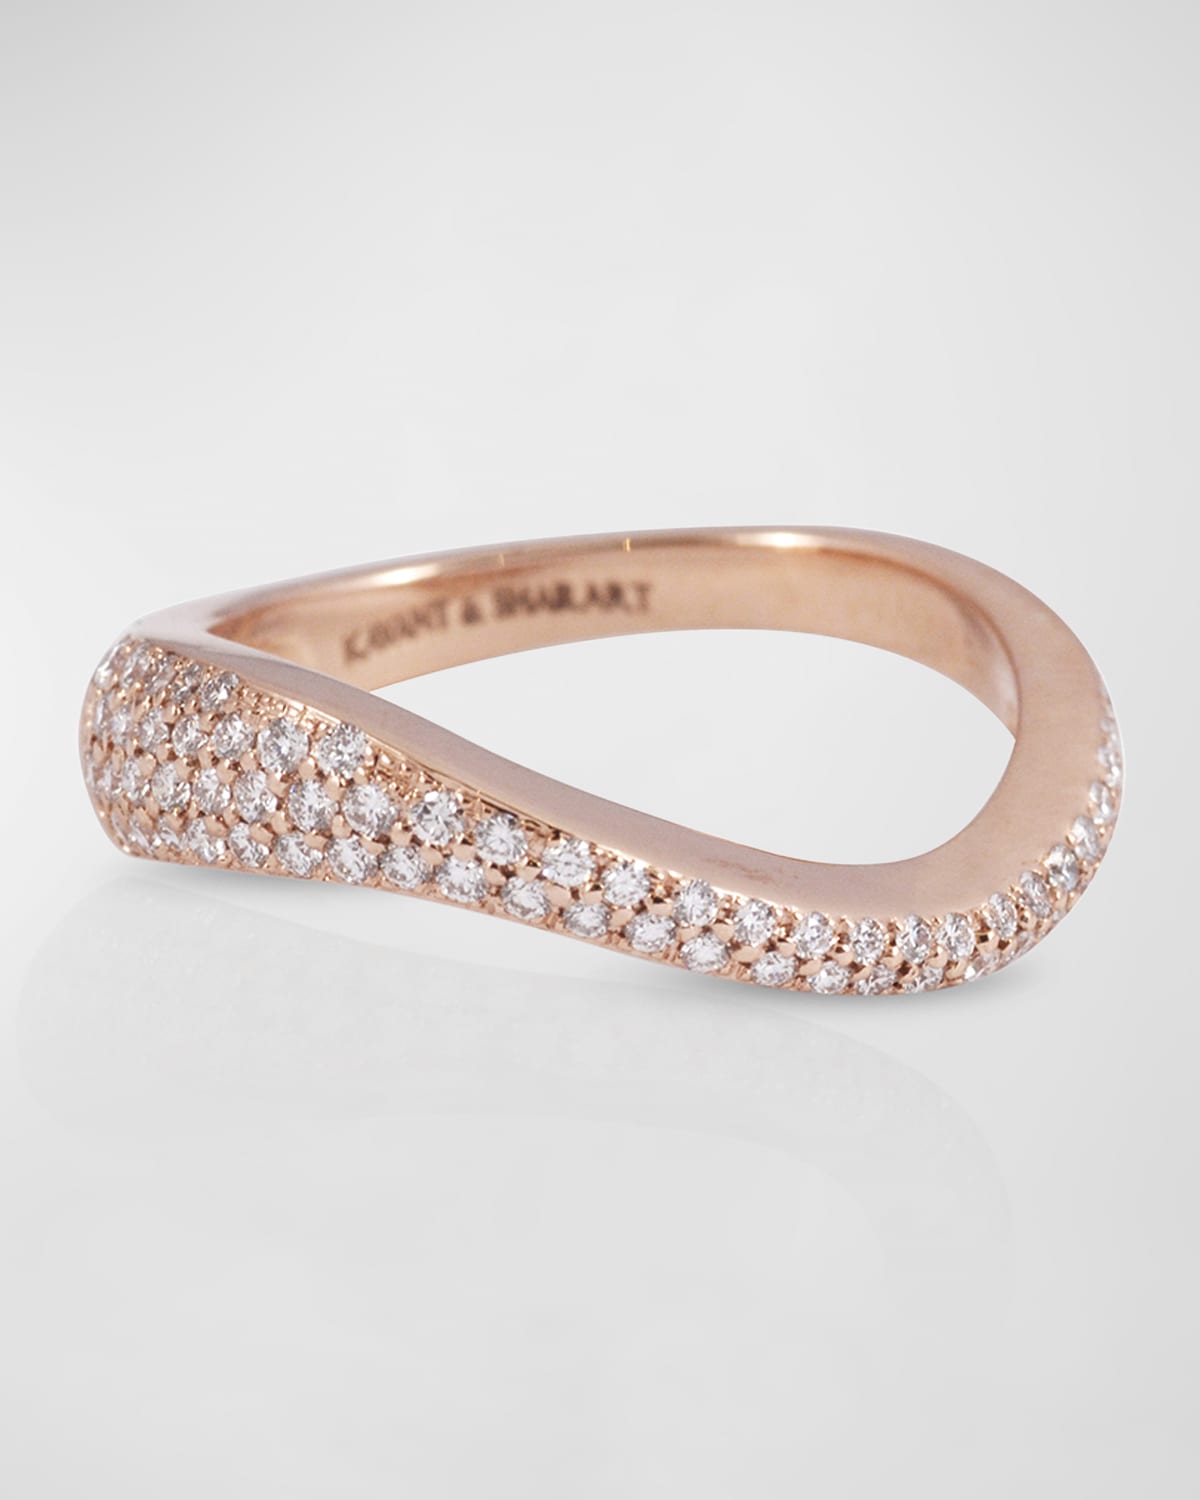 Kavant & Sharart 18K Rose Gold Wave Ring With Diamonds